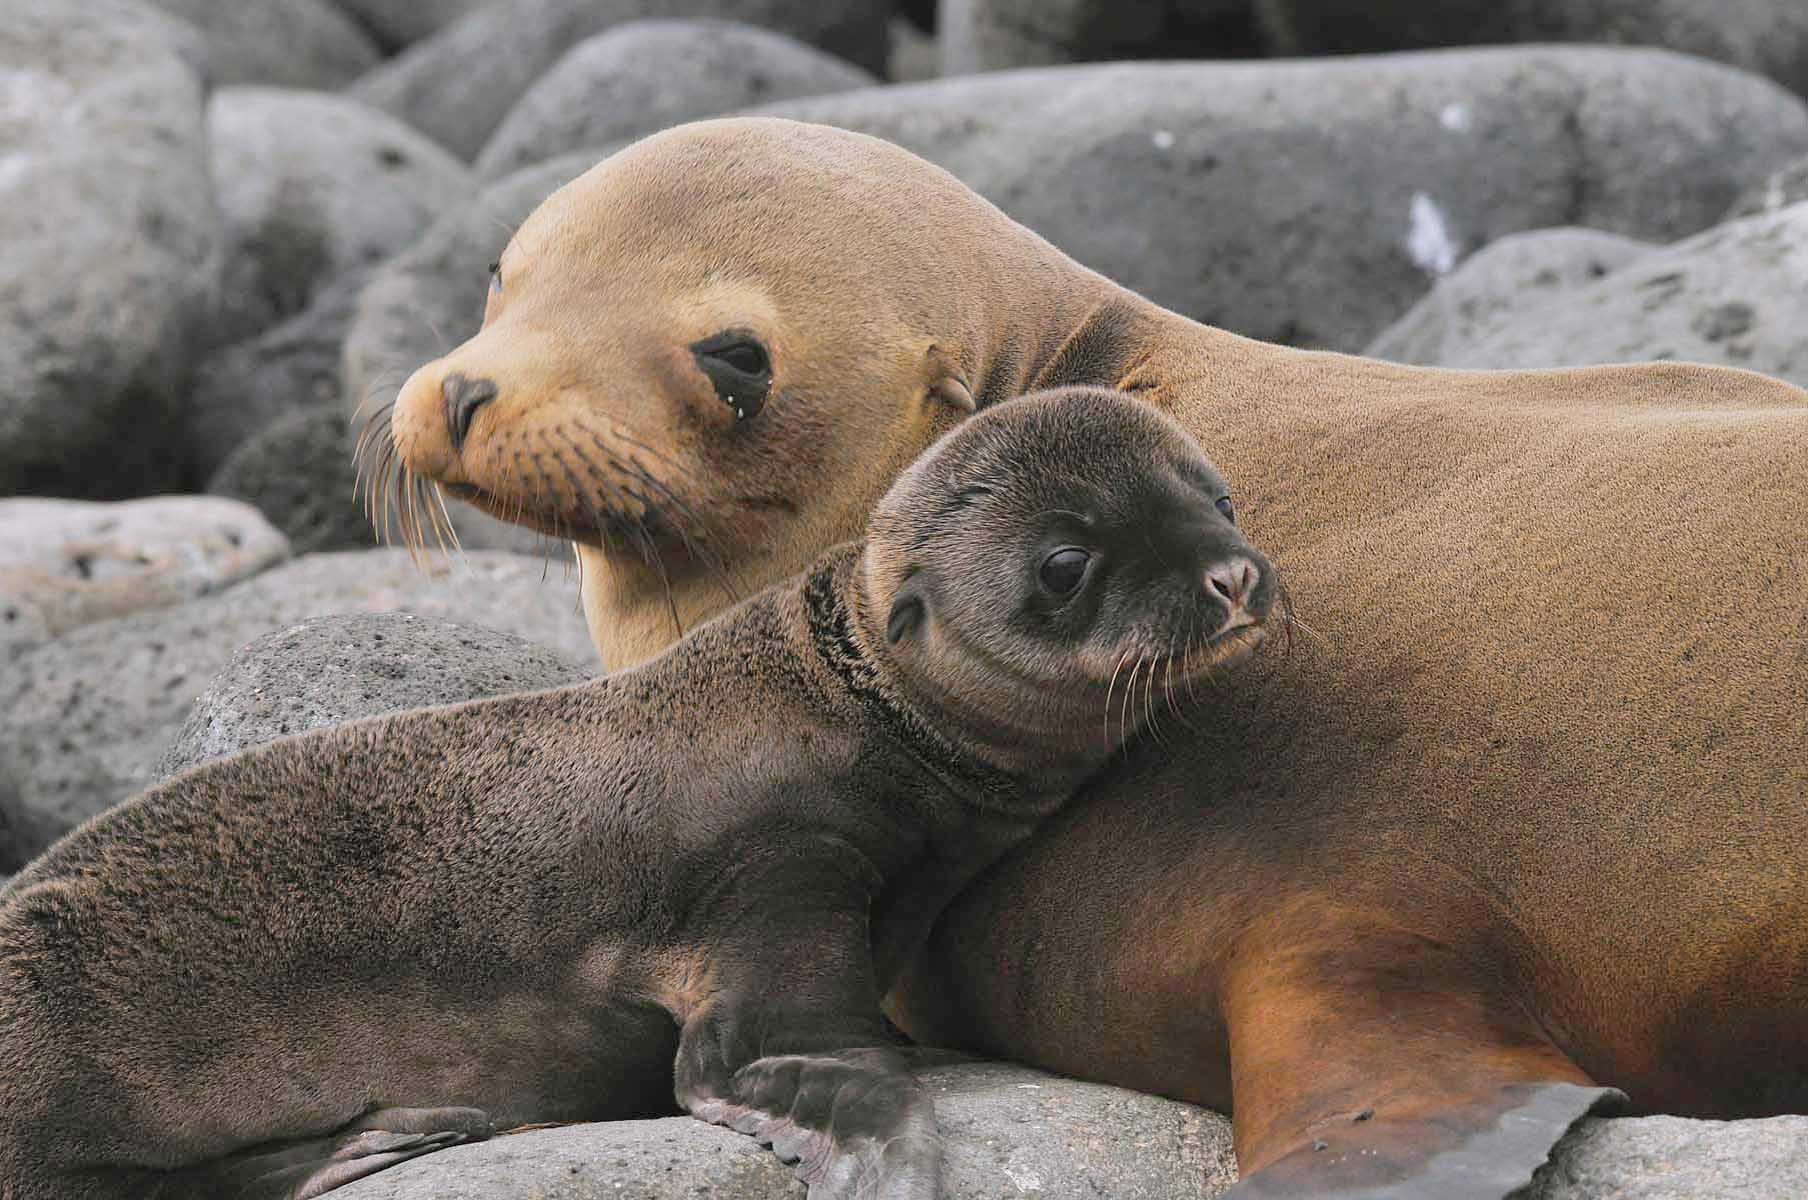 A sea lion and its pup, one of the close-up encounters possible when exploring the Galapagos.  